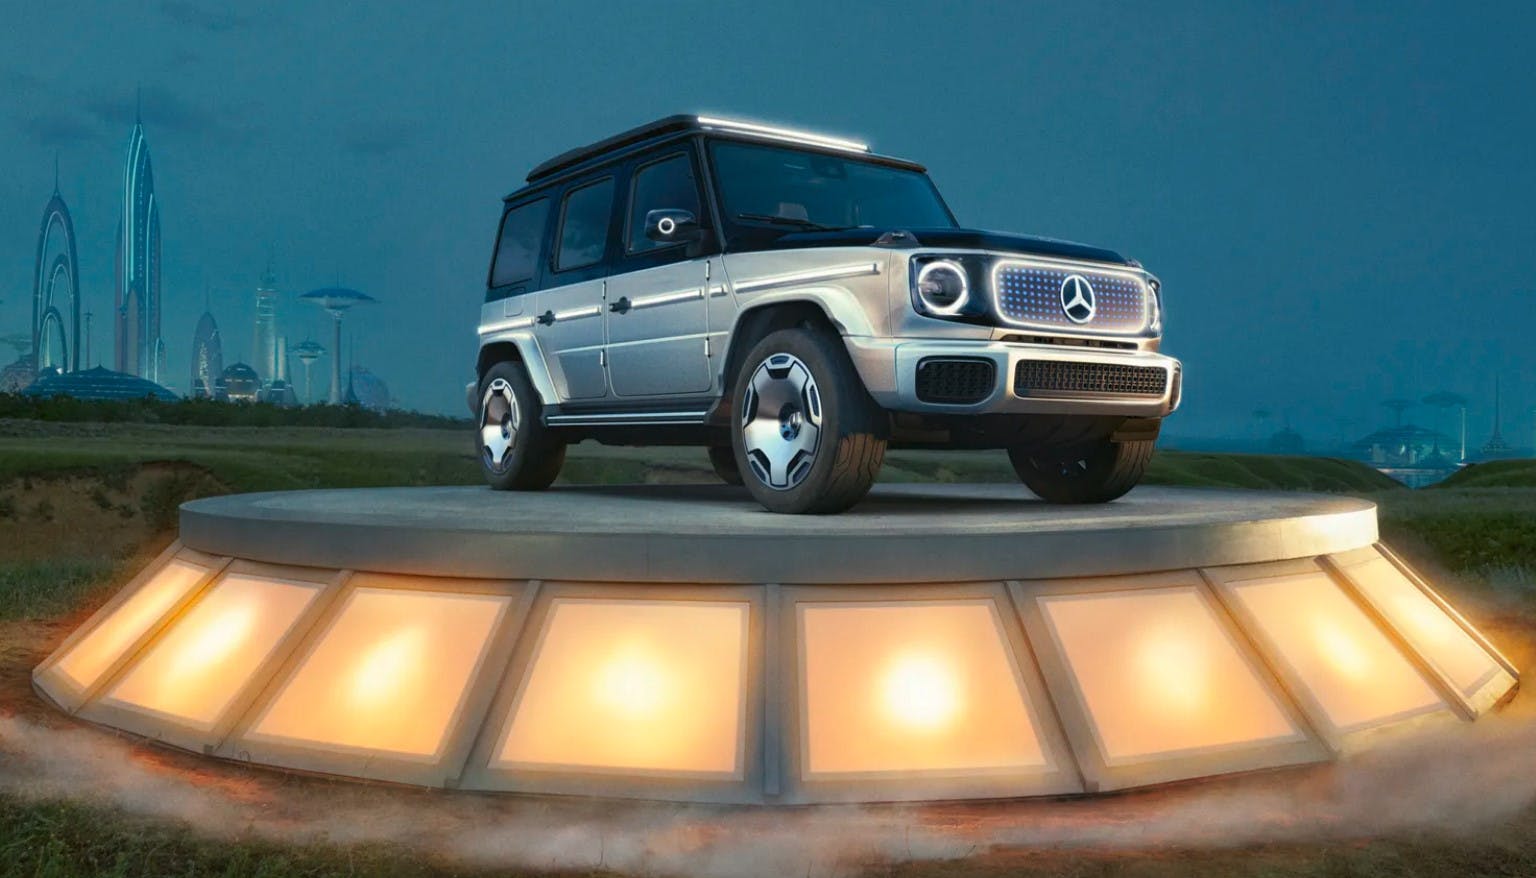 german-automaker-mercedes-benz-has-introduced-the-electric-g-wagen-concept-for-the-future